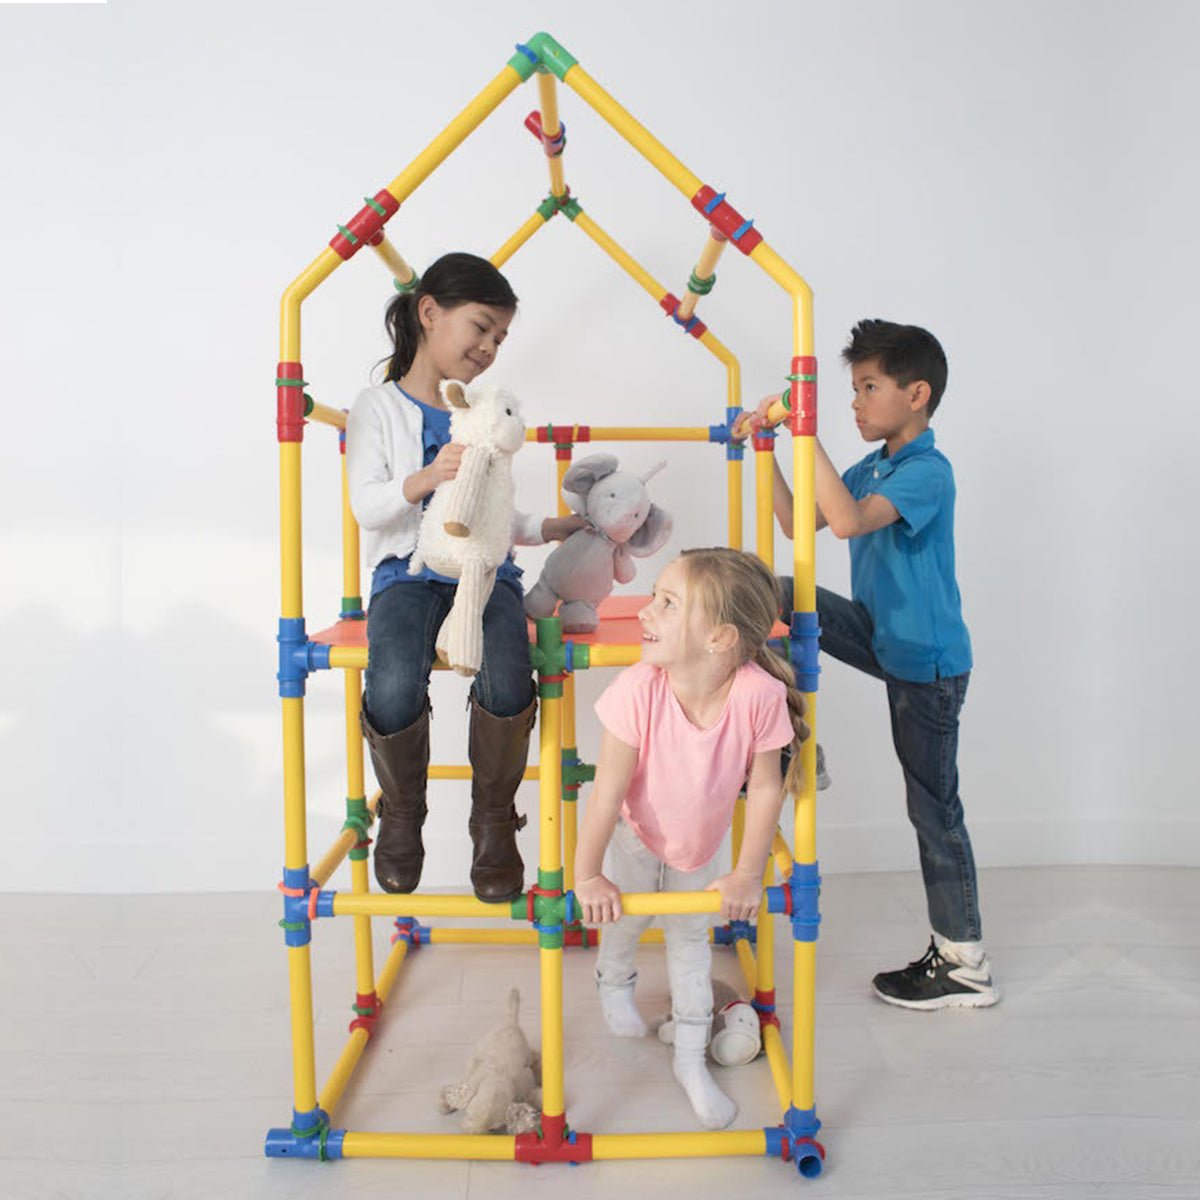 Shop Tubelox Deluxe Set for Imaginative Play and Learning